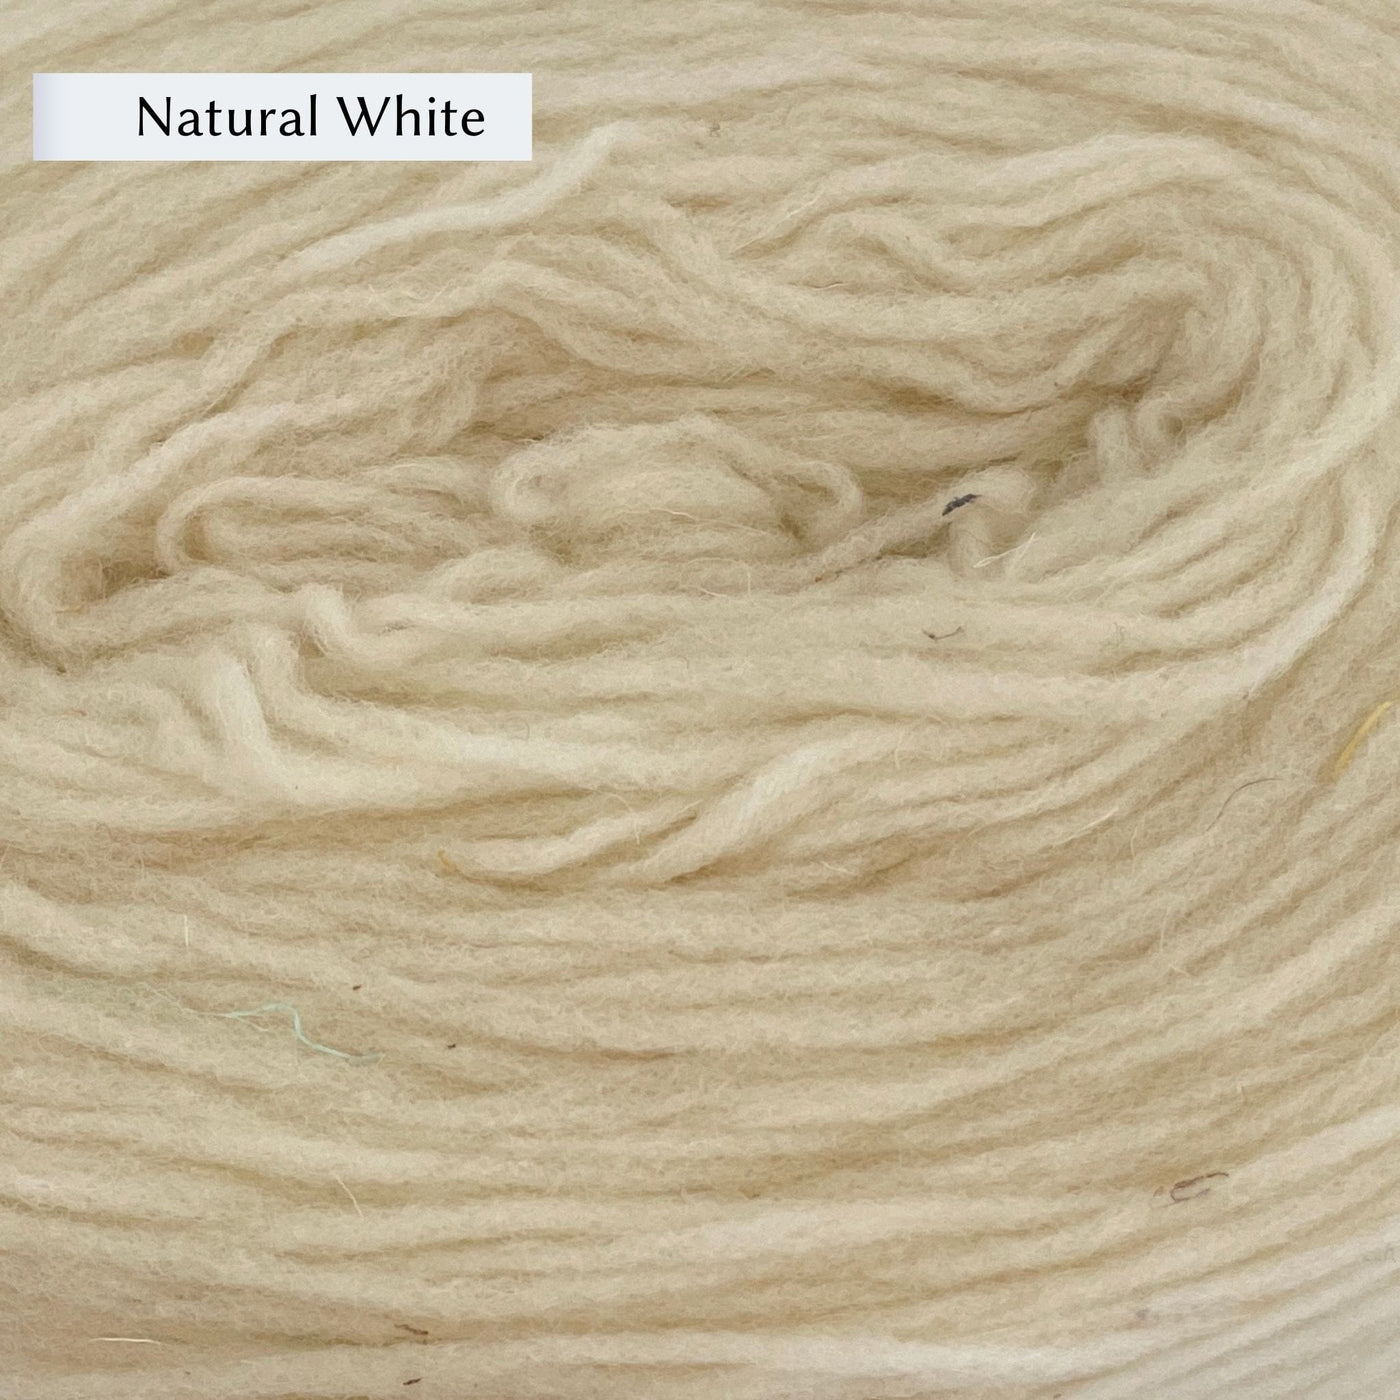 Manchelopis, a unspun yarn, in color Natural White, a warm cream